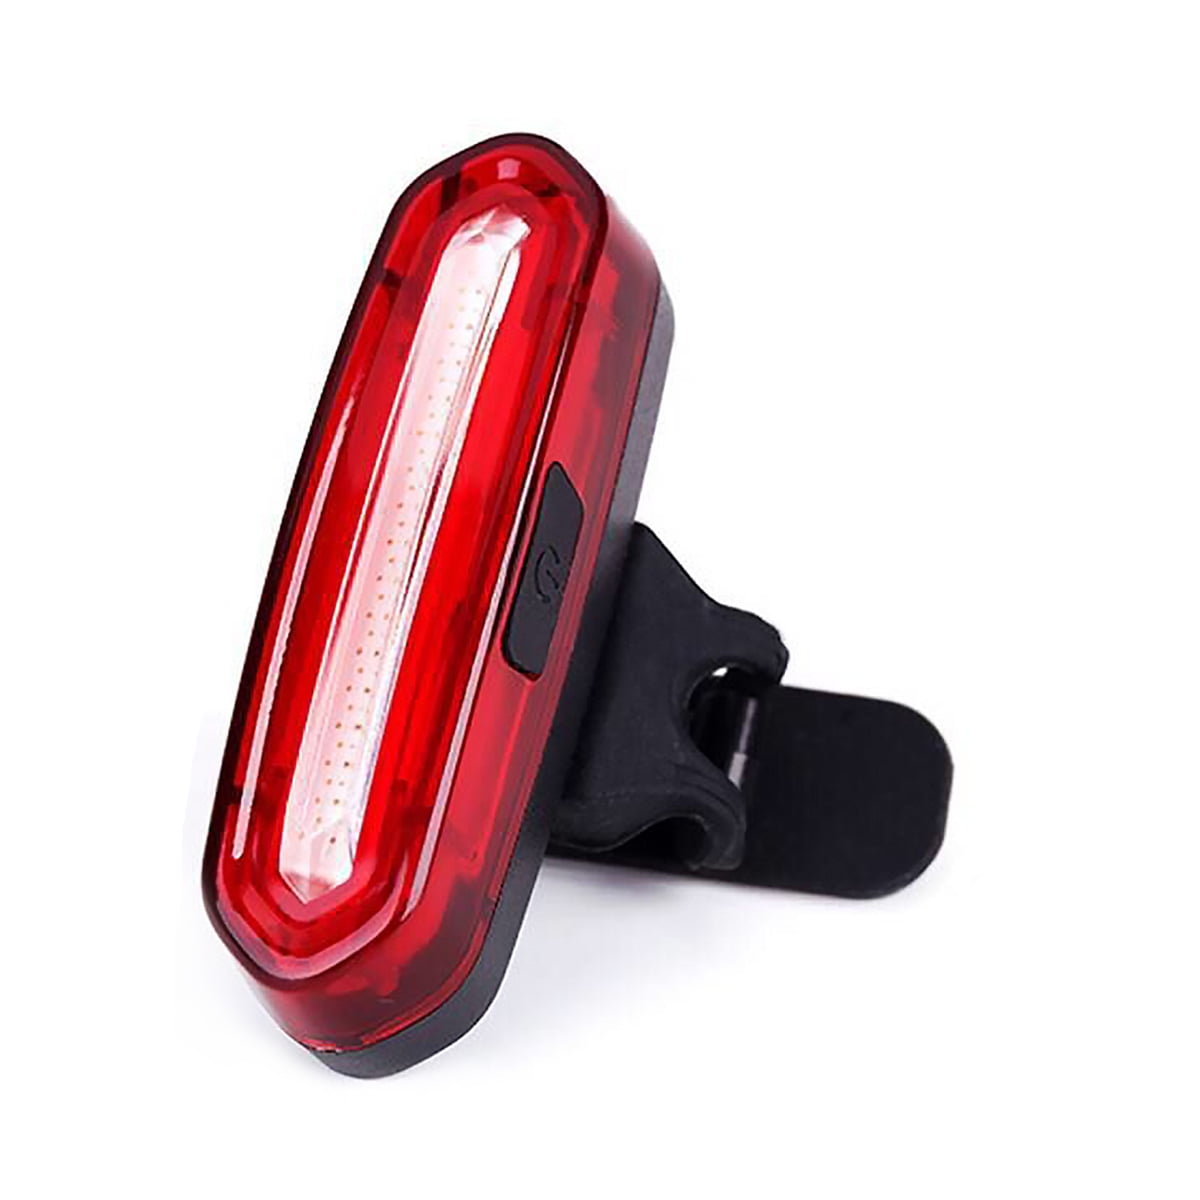 Baulody Bike Tail Light Rear Bike Light USB Rechargeable Super Bright Led Red Bicycle Taillight Fits on Any Road Bikes for Cycling Safety Flashlight 